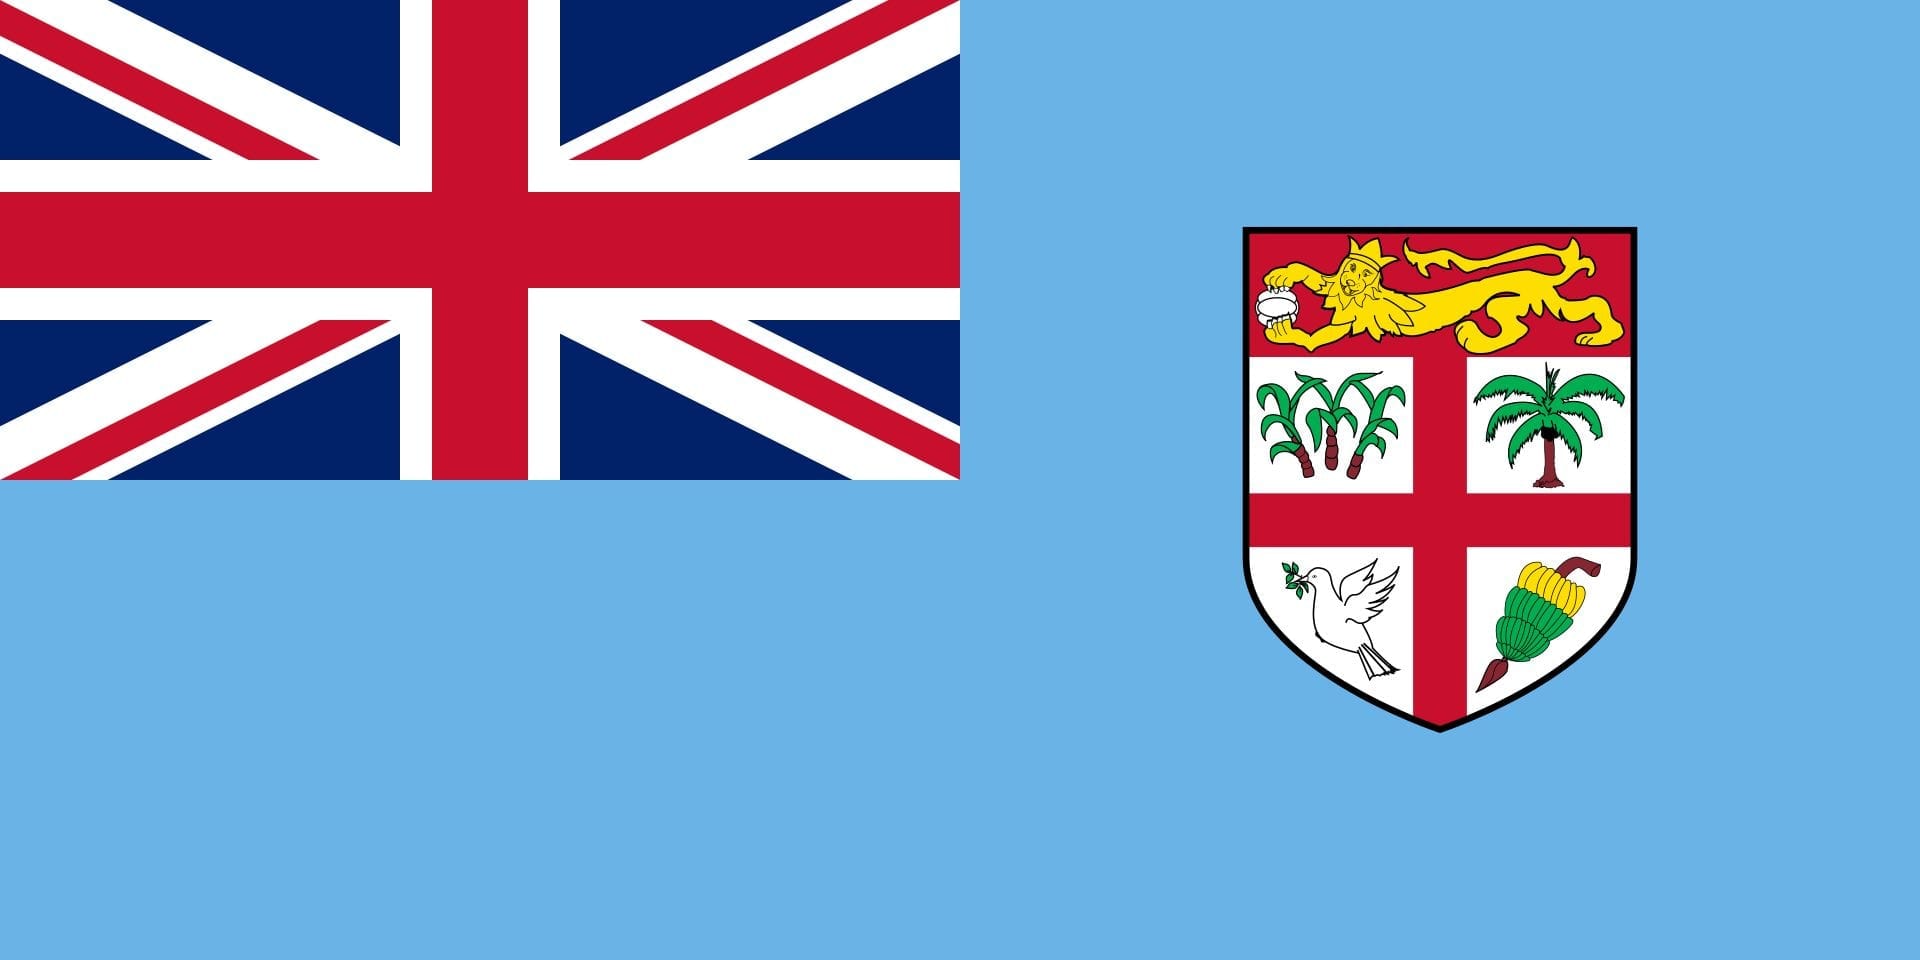 Facts about Fiji